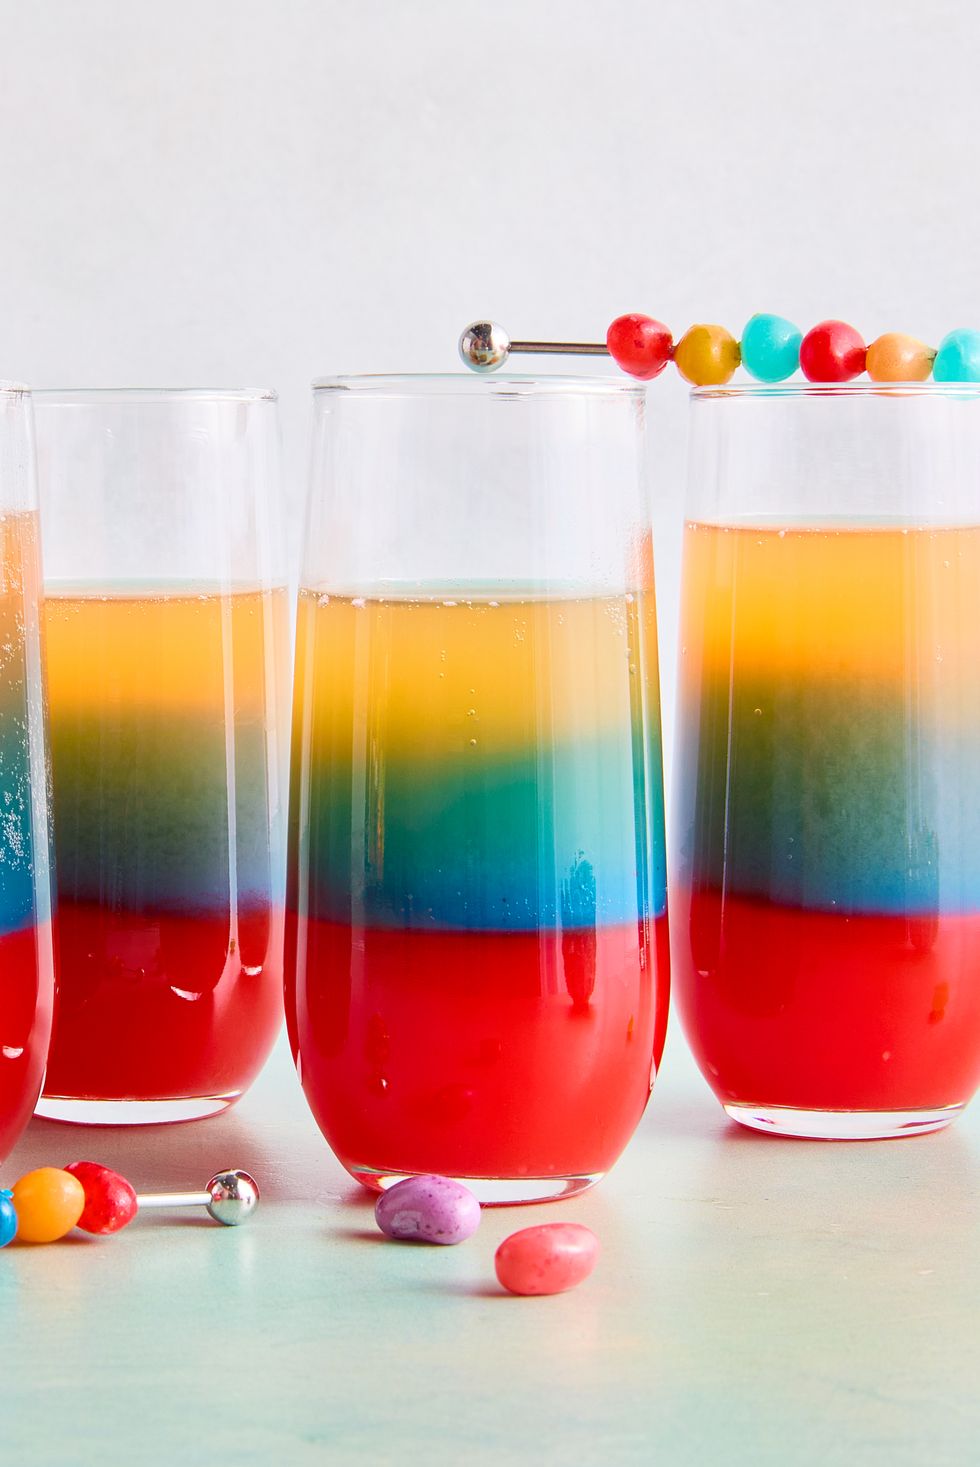 layered drink with red, blue, and orange topped with jelly beans